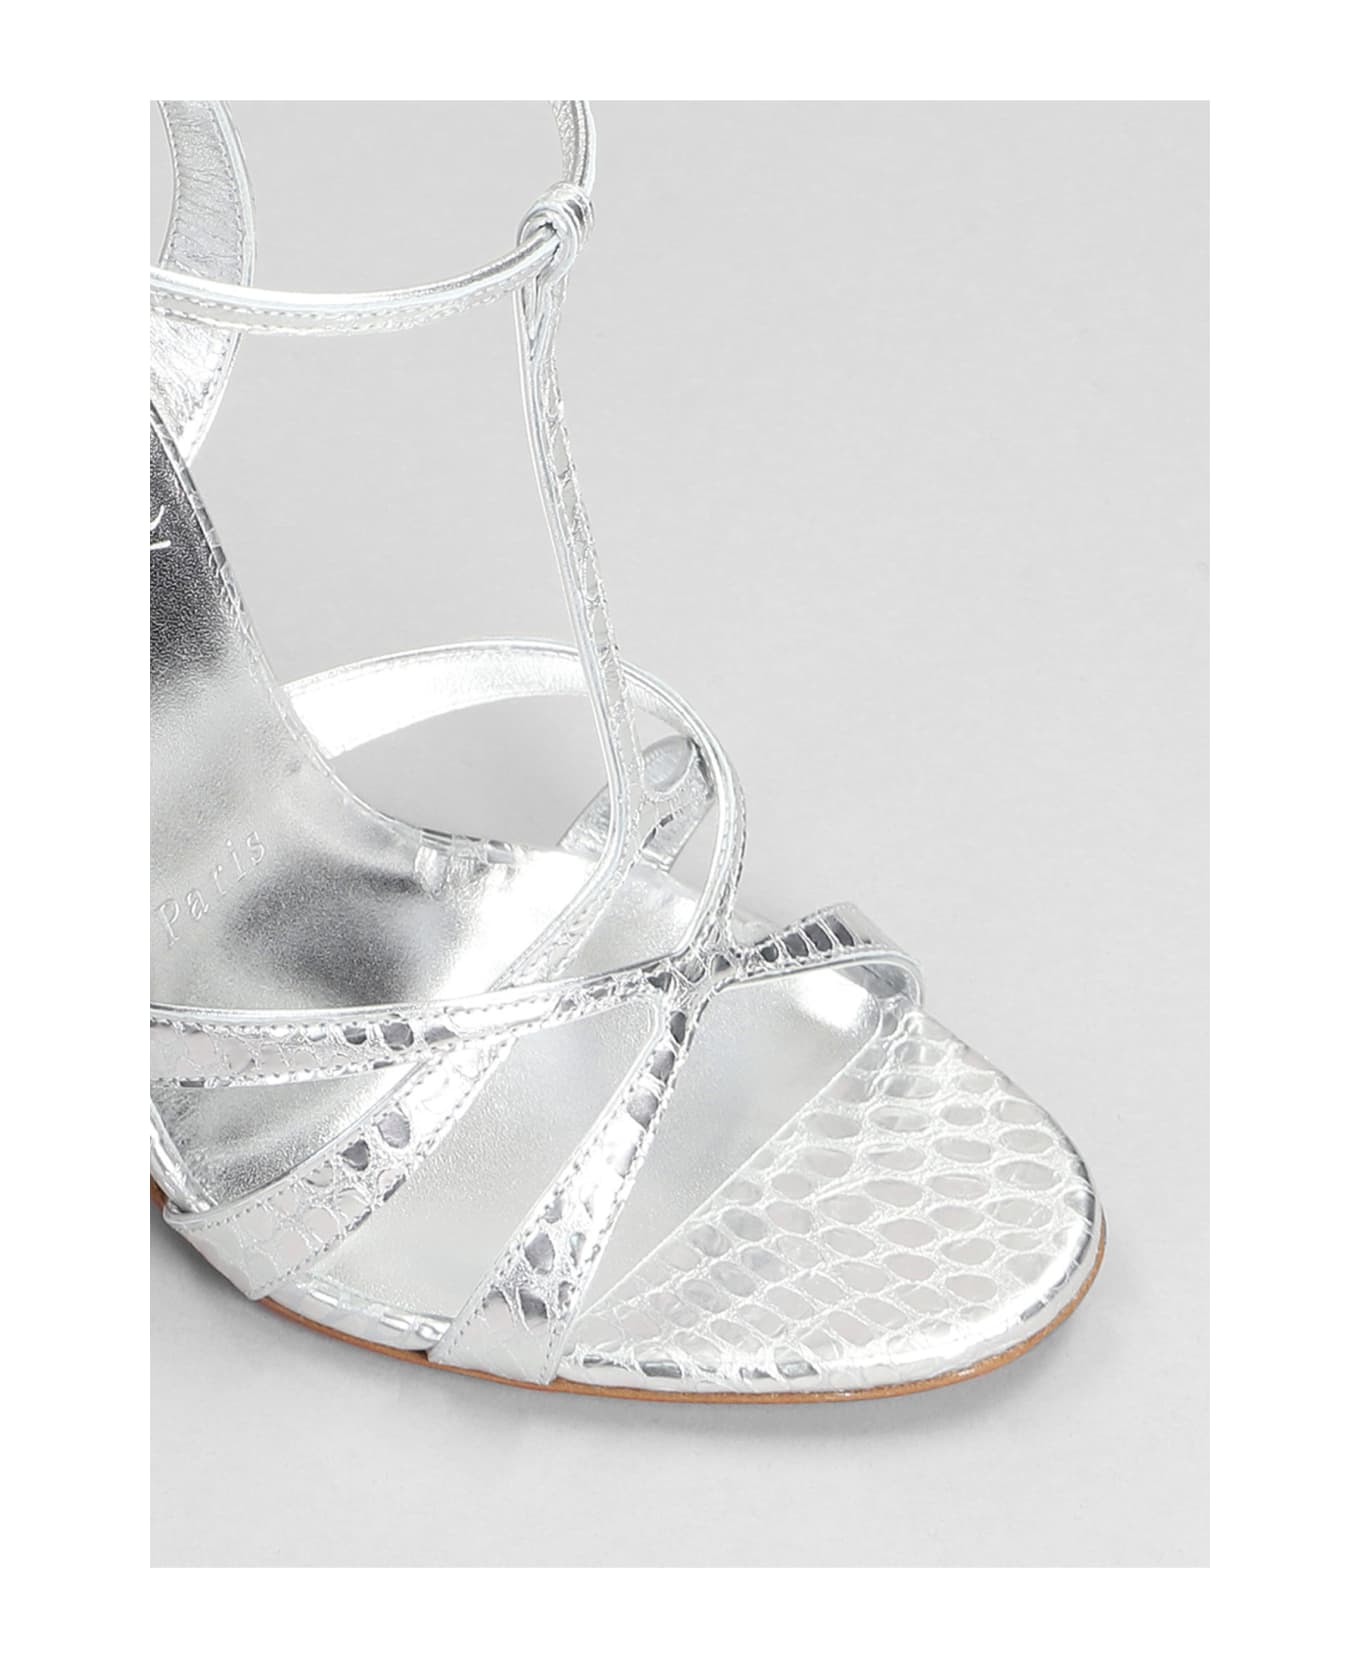 Christian Louboutin Tangueva 100 Sandals In Silver Leather - silver